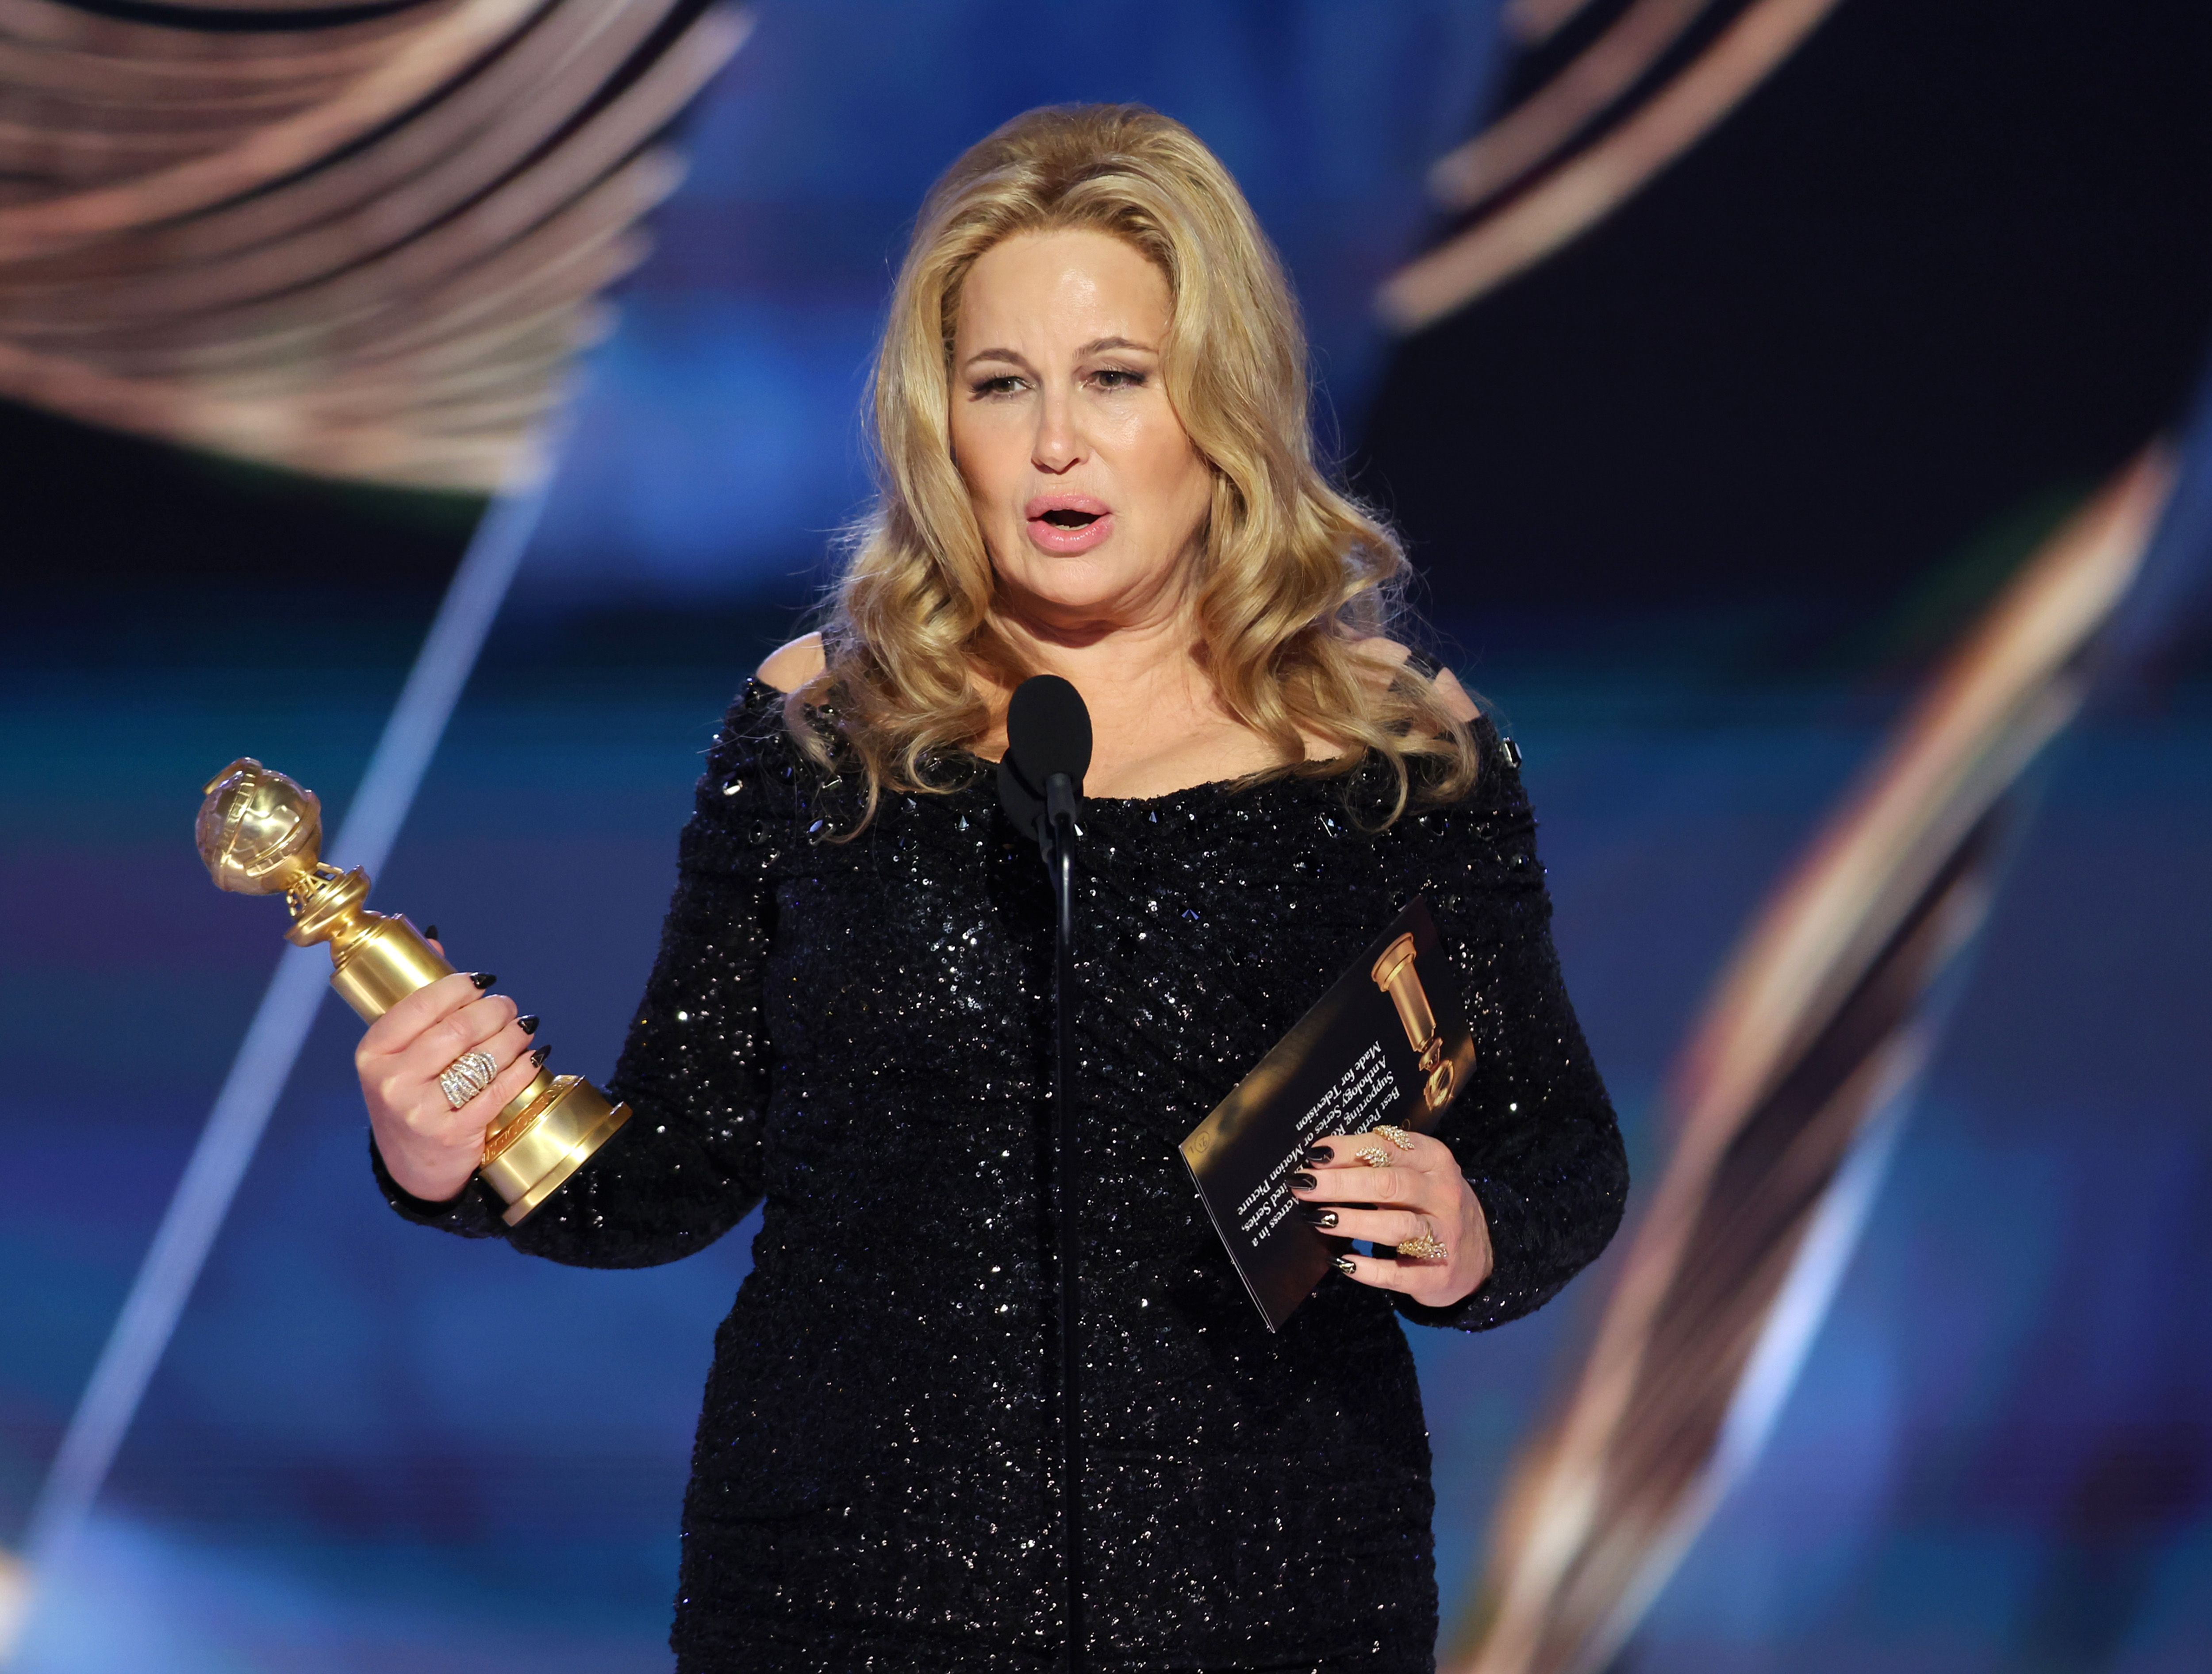  Jennifer Coolidge accepts the Best Supporting Actress in a Limited or Anthology Series or TV Film award for "The White Lotus" onstage at the Golden Globes on January 10 in Beverly Hills.